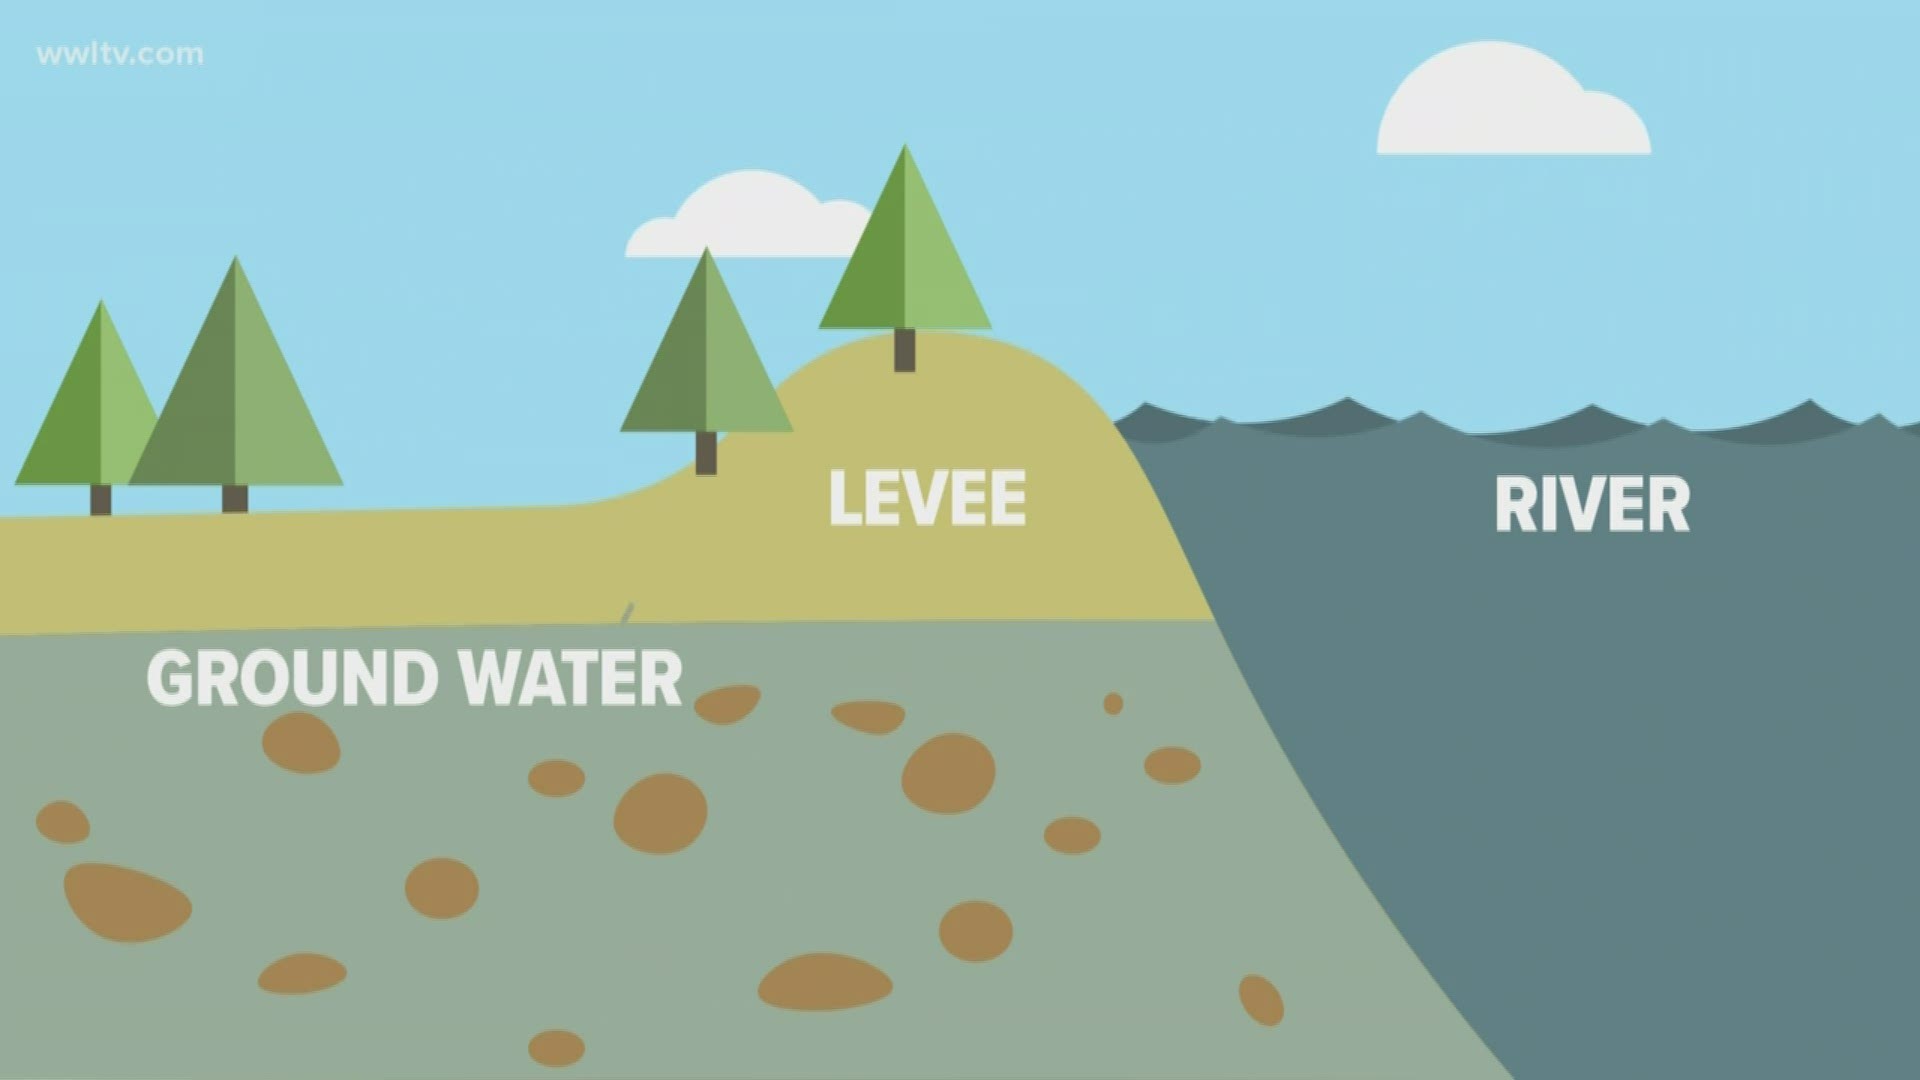 A sand boil occurs when the weight from the high river water pushes down (pressure) on the soil layers under the levee.